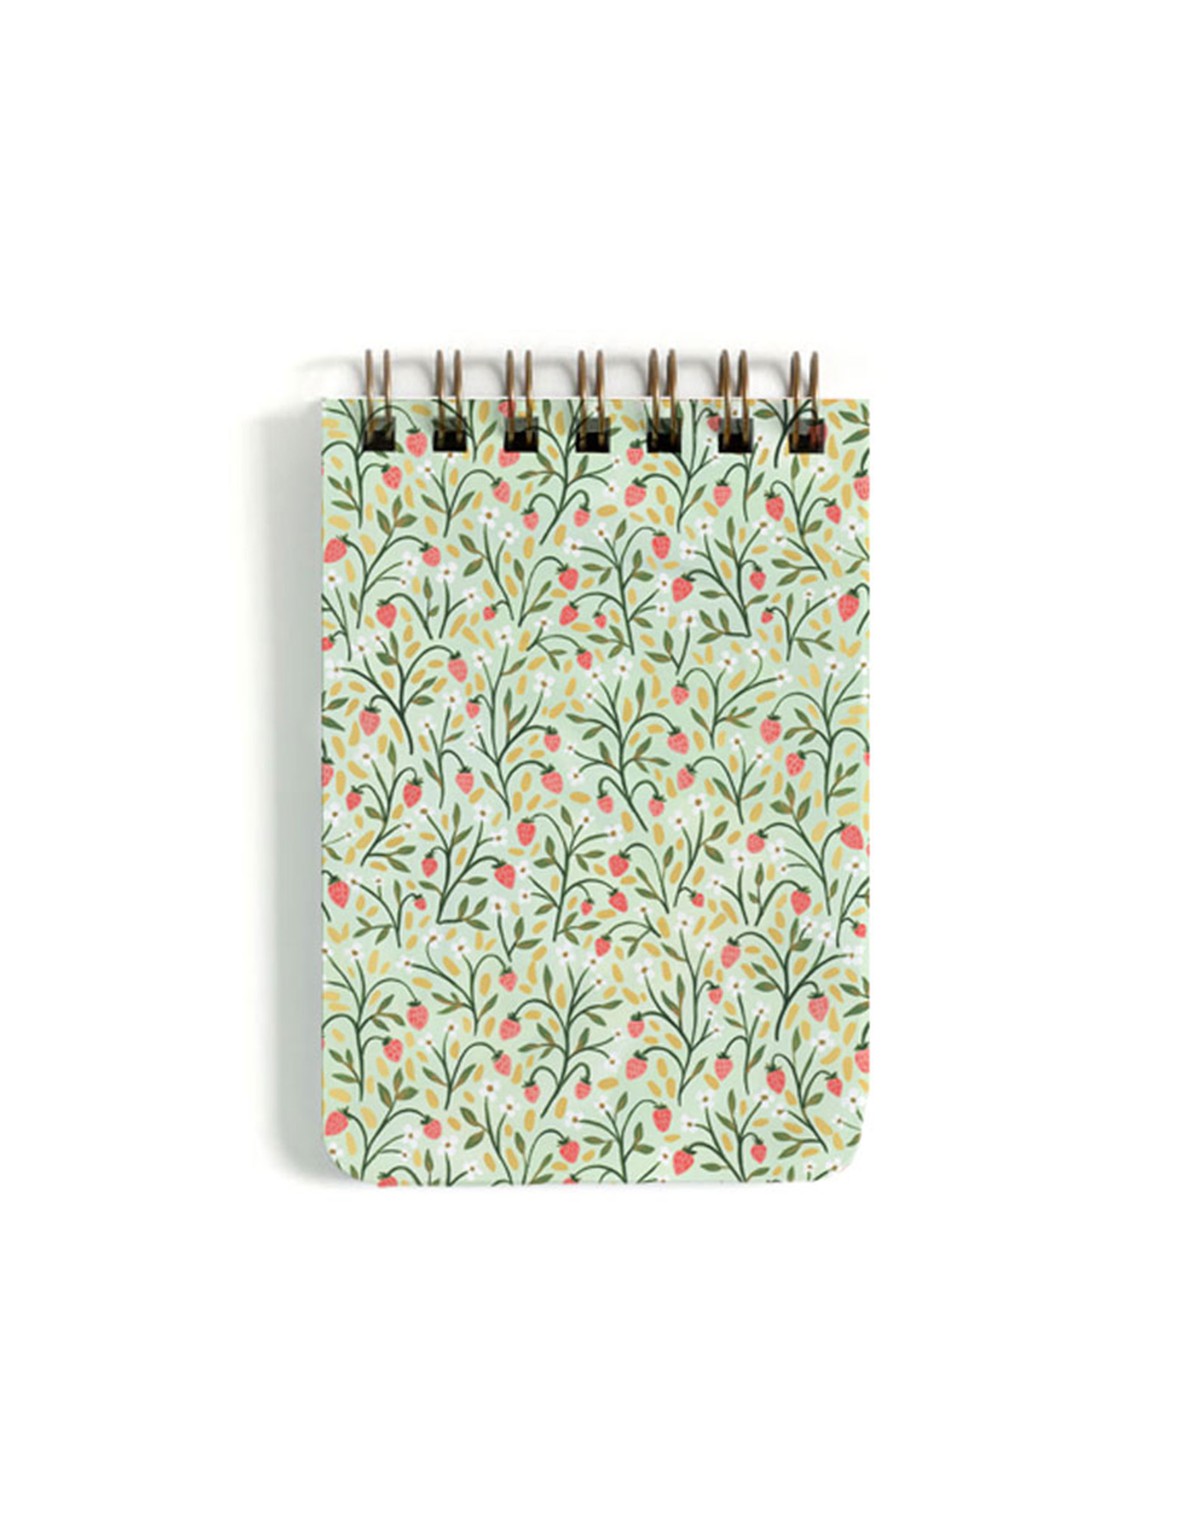 200803 small strawberry meadow notebook slider